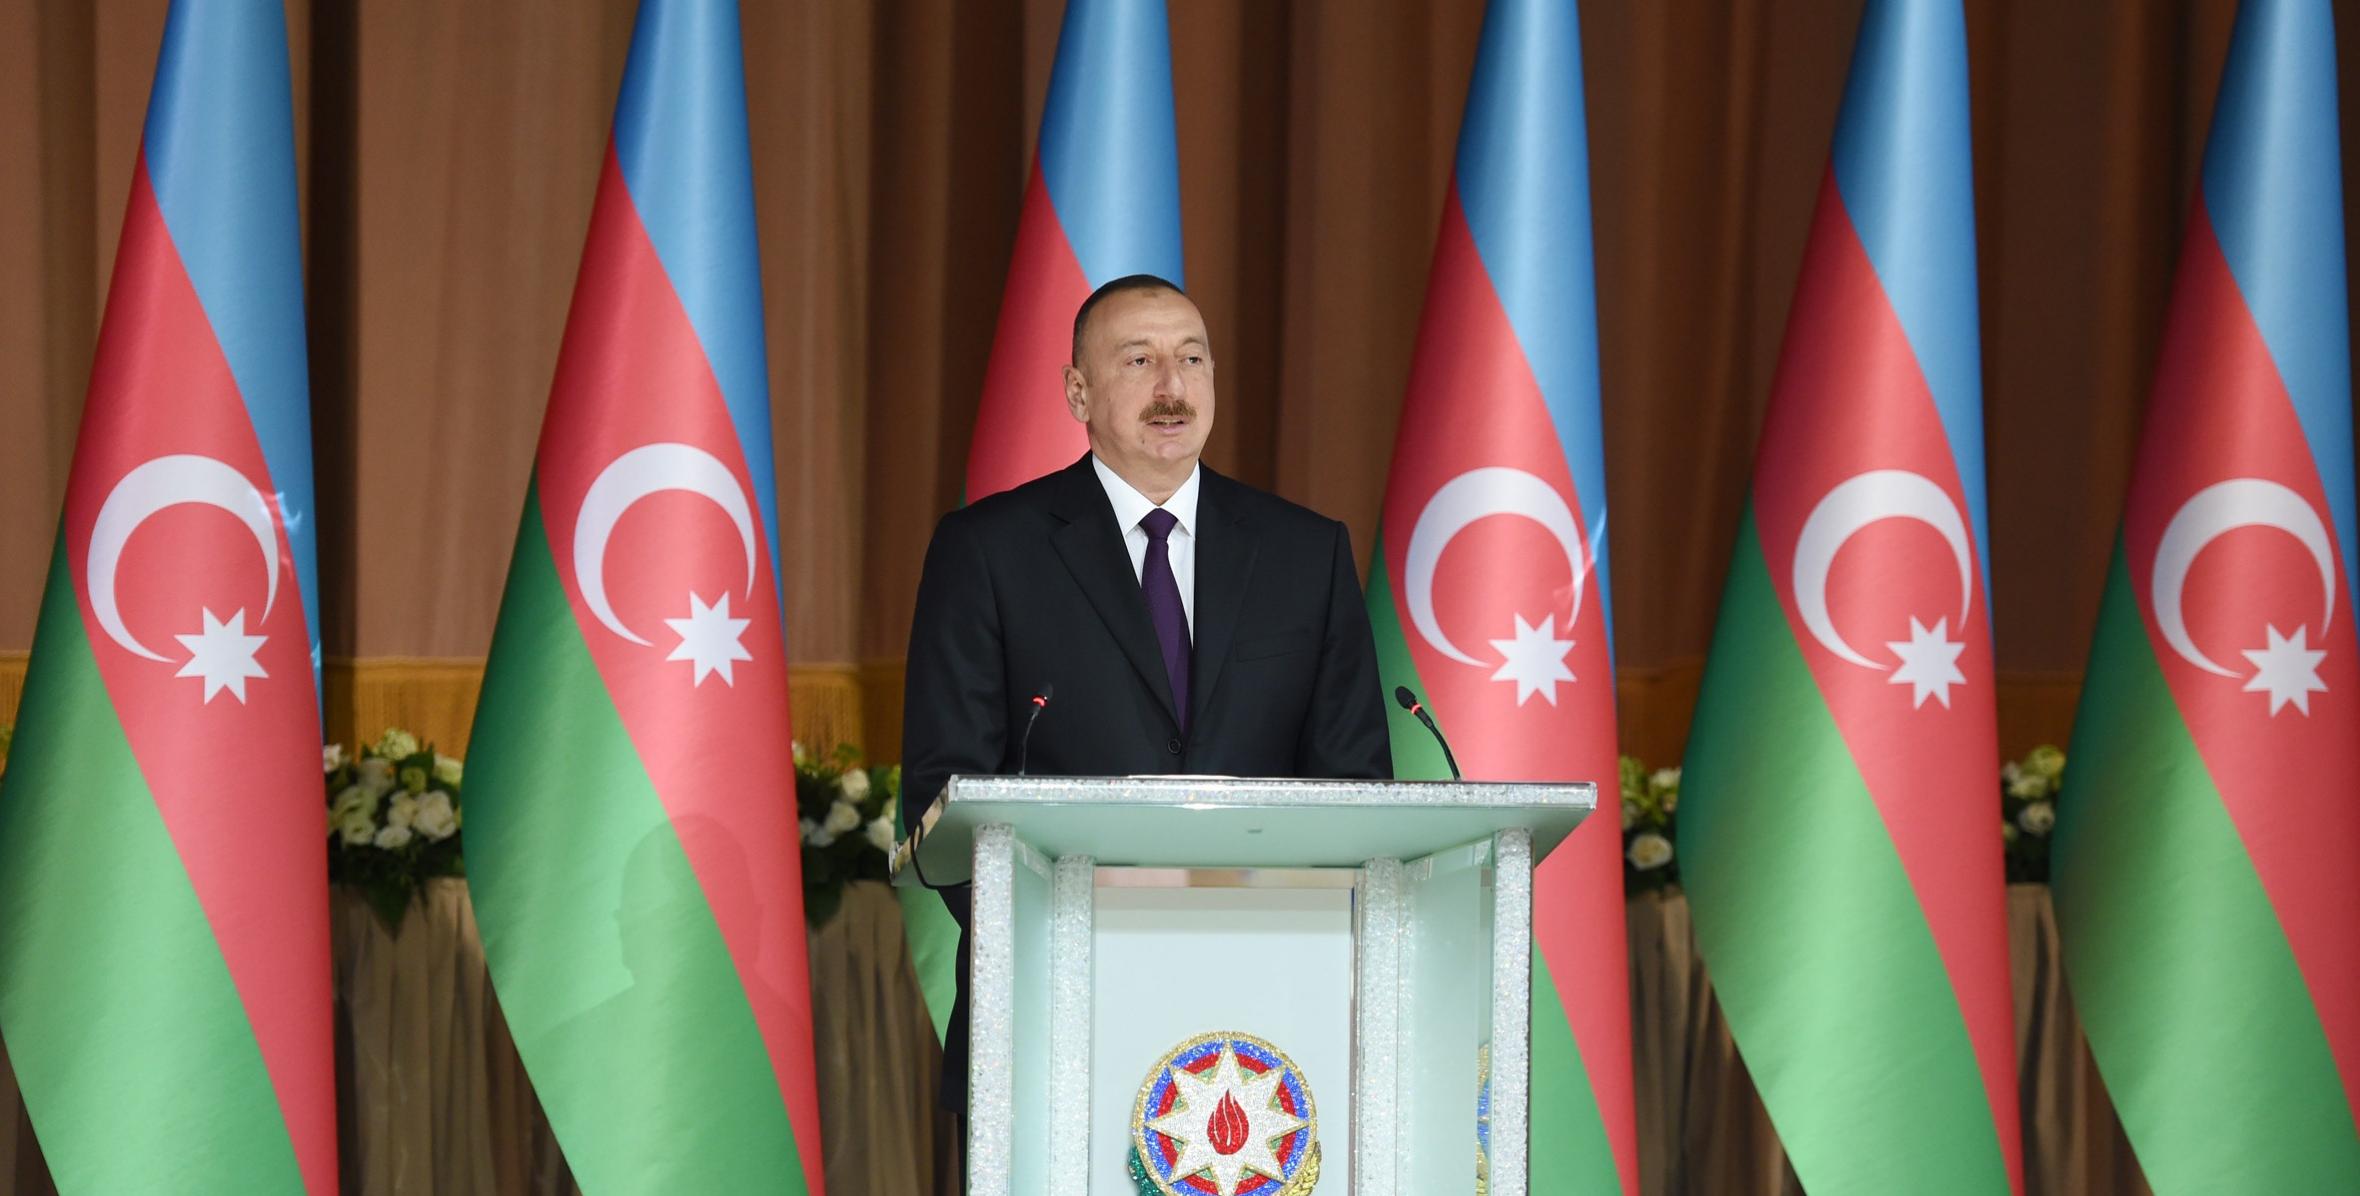 Speech by Ilham Aliyev at official reception on the occasion of Azerbaijan's Republic Day